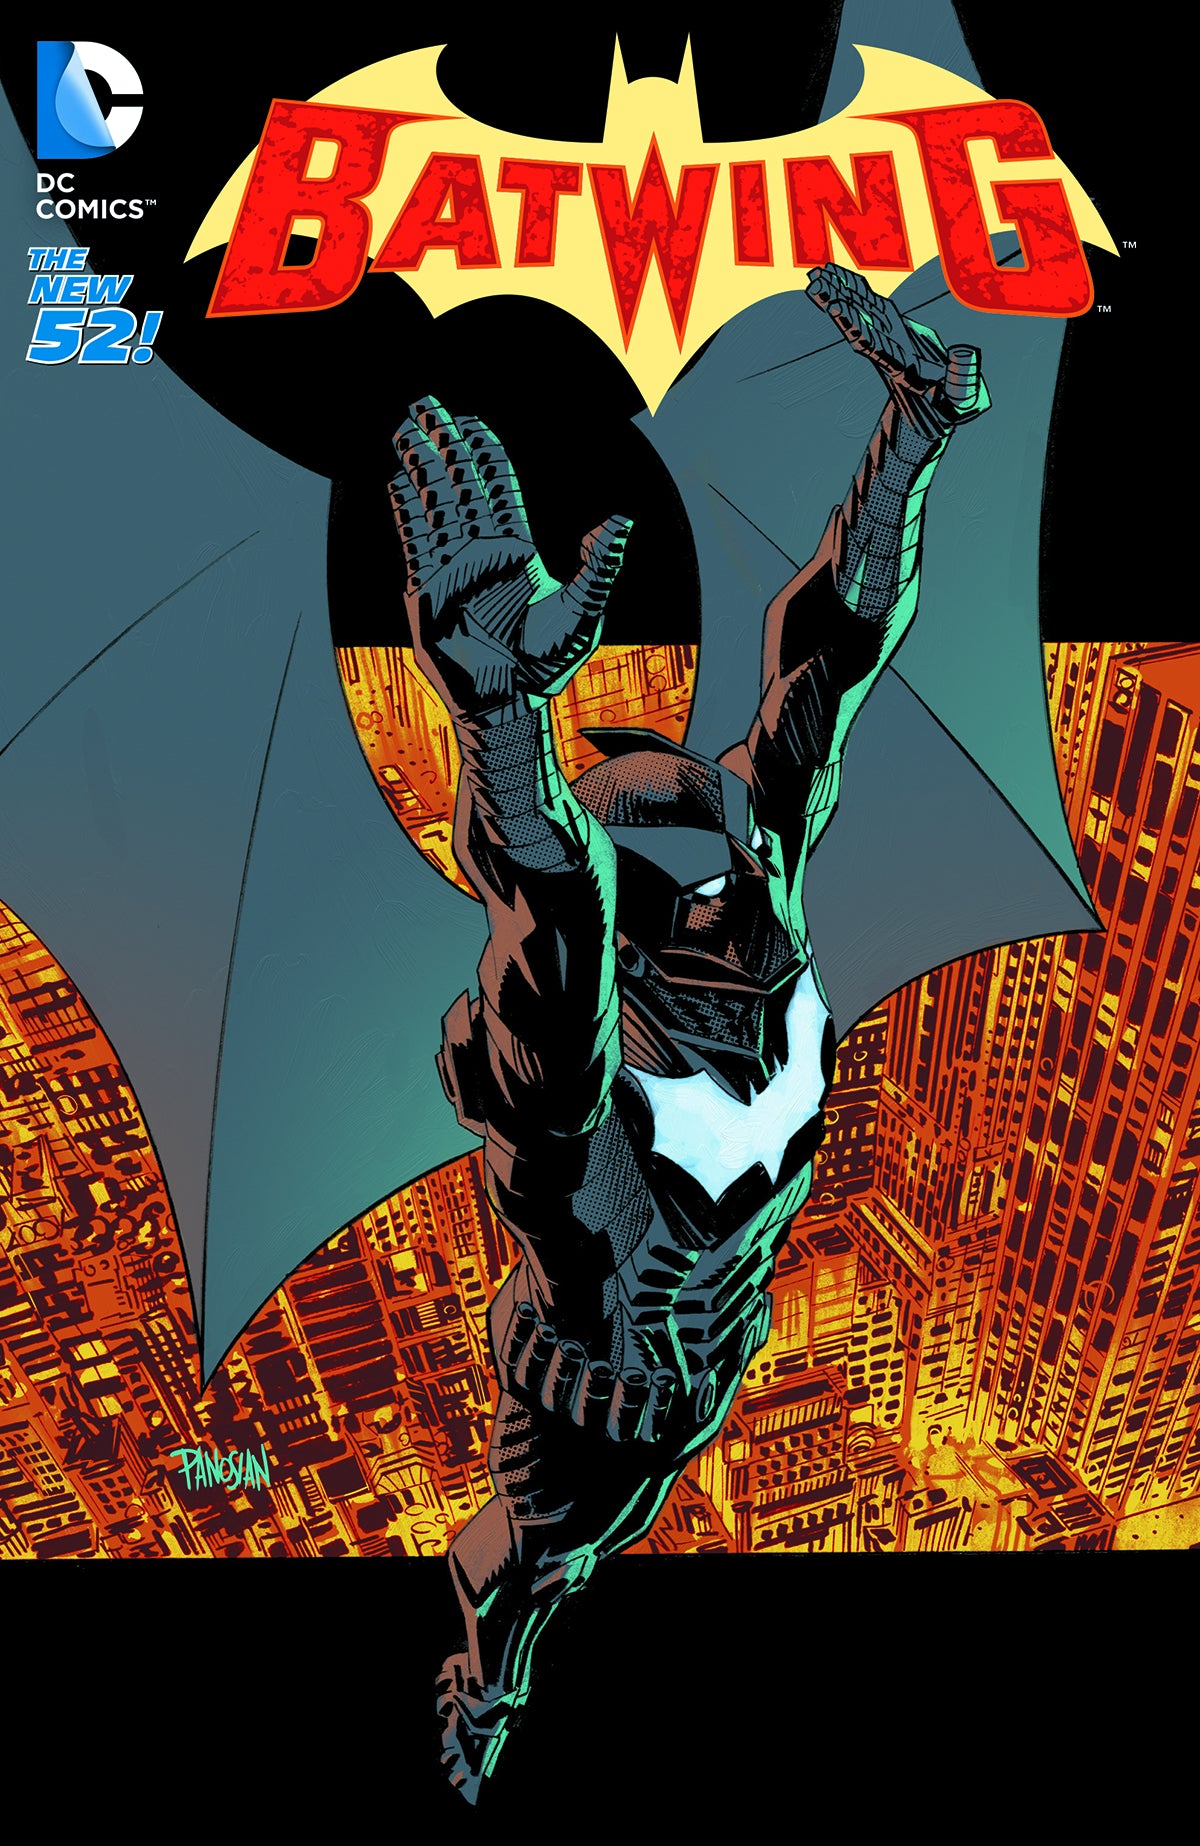 BATWING TP VOL 05 INTO THE DARK (N52) | Game Master's Emporium (The New GME)